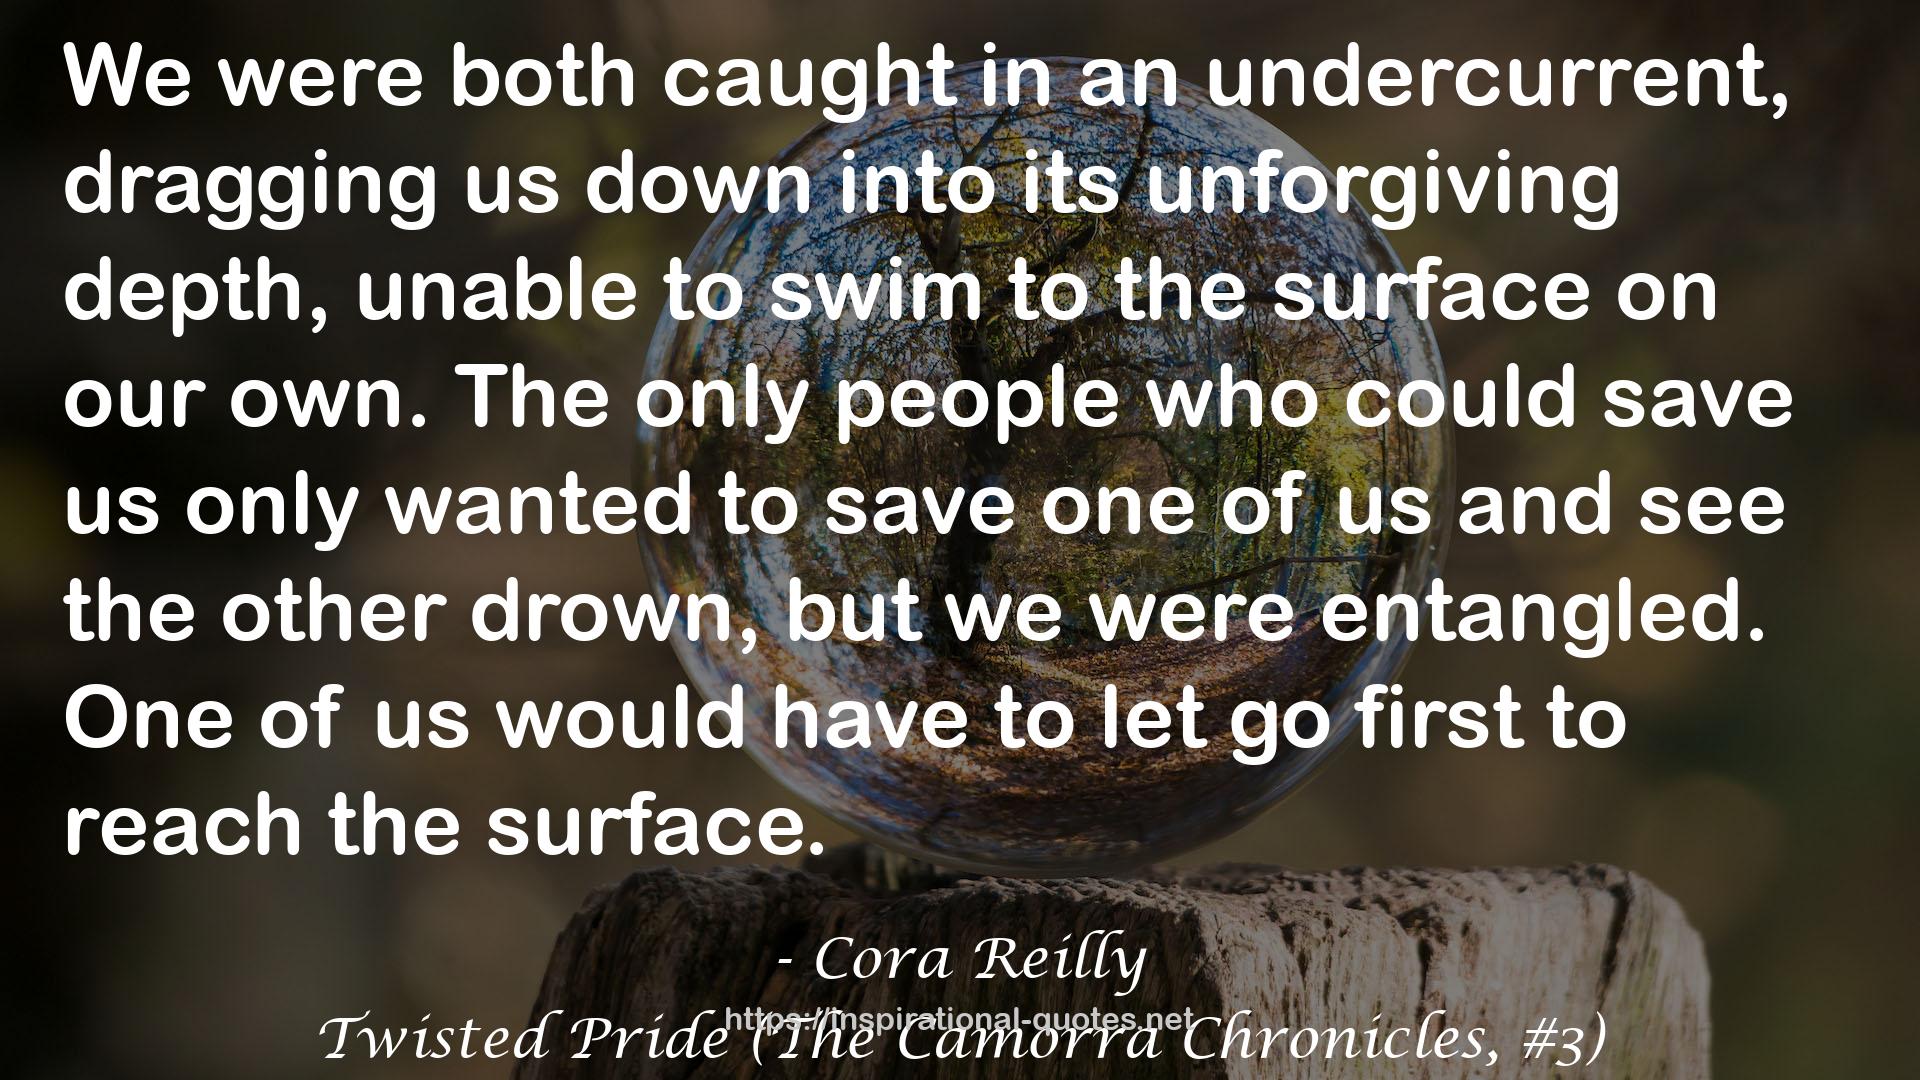 Twisted Pride (The Camorra Chronicles, #3) QUOTES